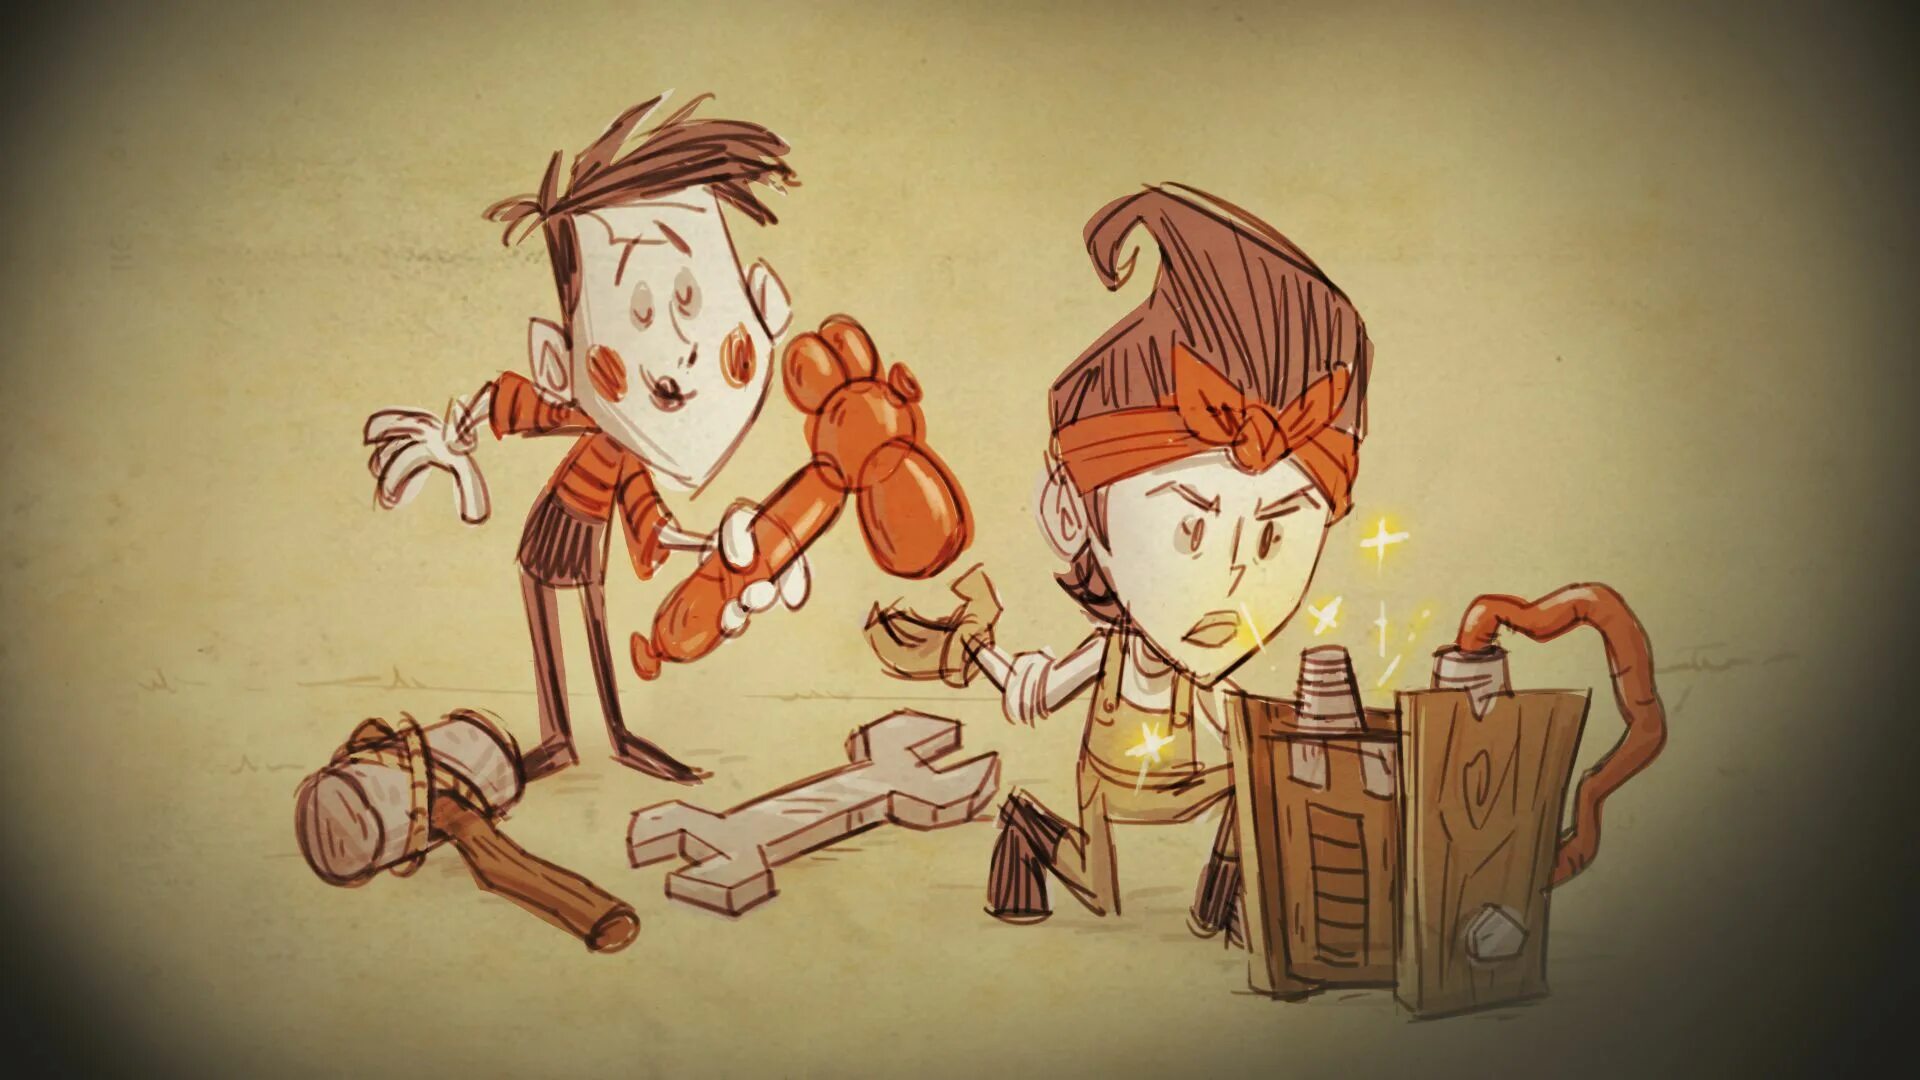 Don t start new. Донт старв. ВЭС don't Starve. Don't Starve персонажи ВЭС. Don't Starve Wes Art.